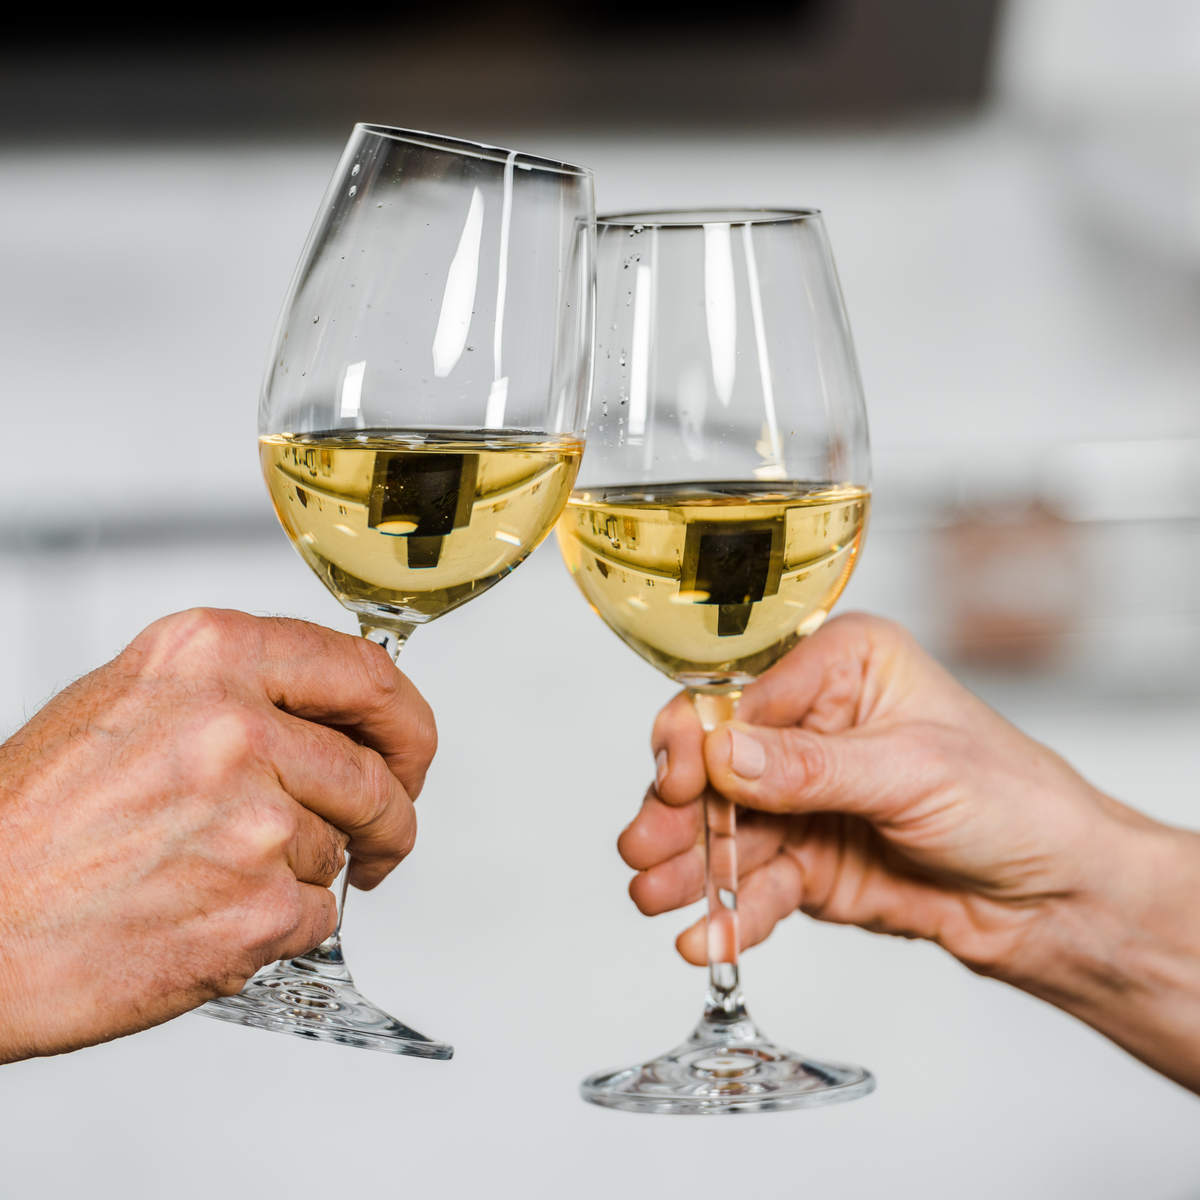 Two glasses of white wine being brought together.